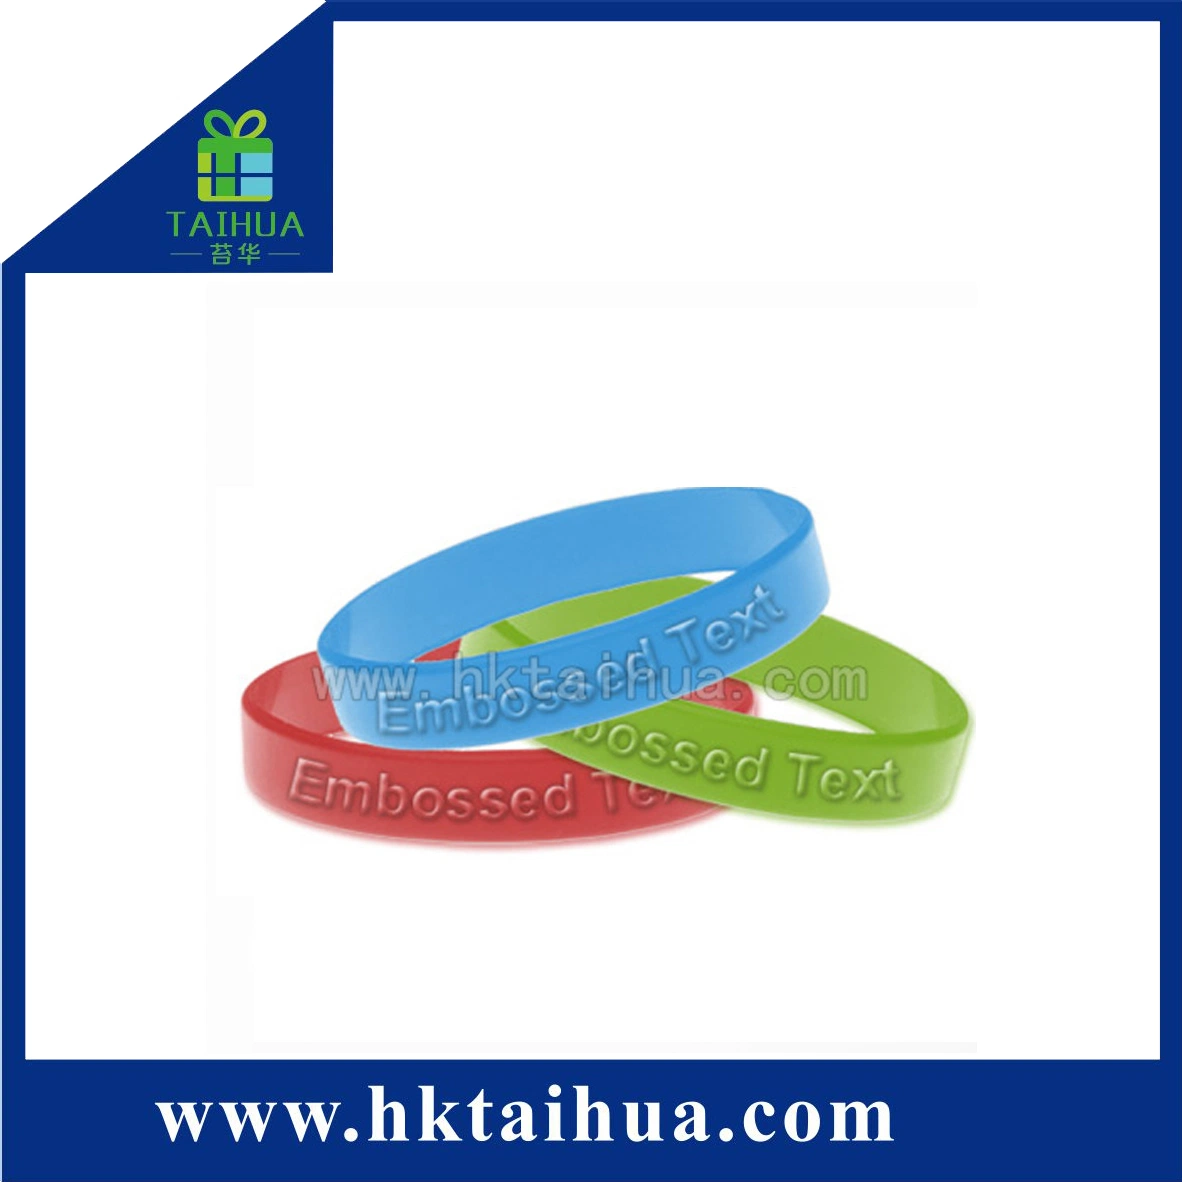 Custom Rubber Wrist Bands Embossed Silicone Bracelet (TH-band014)